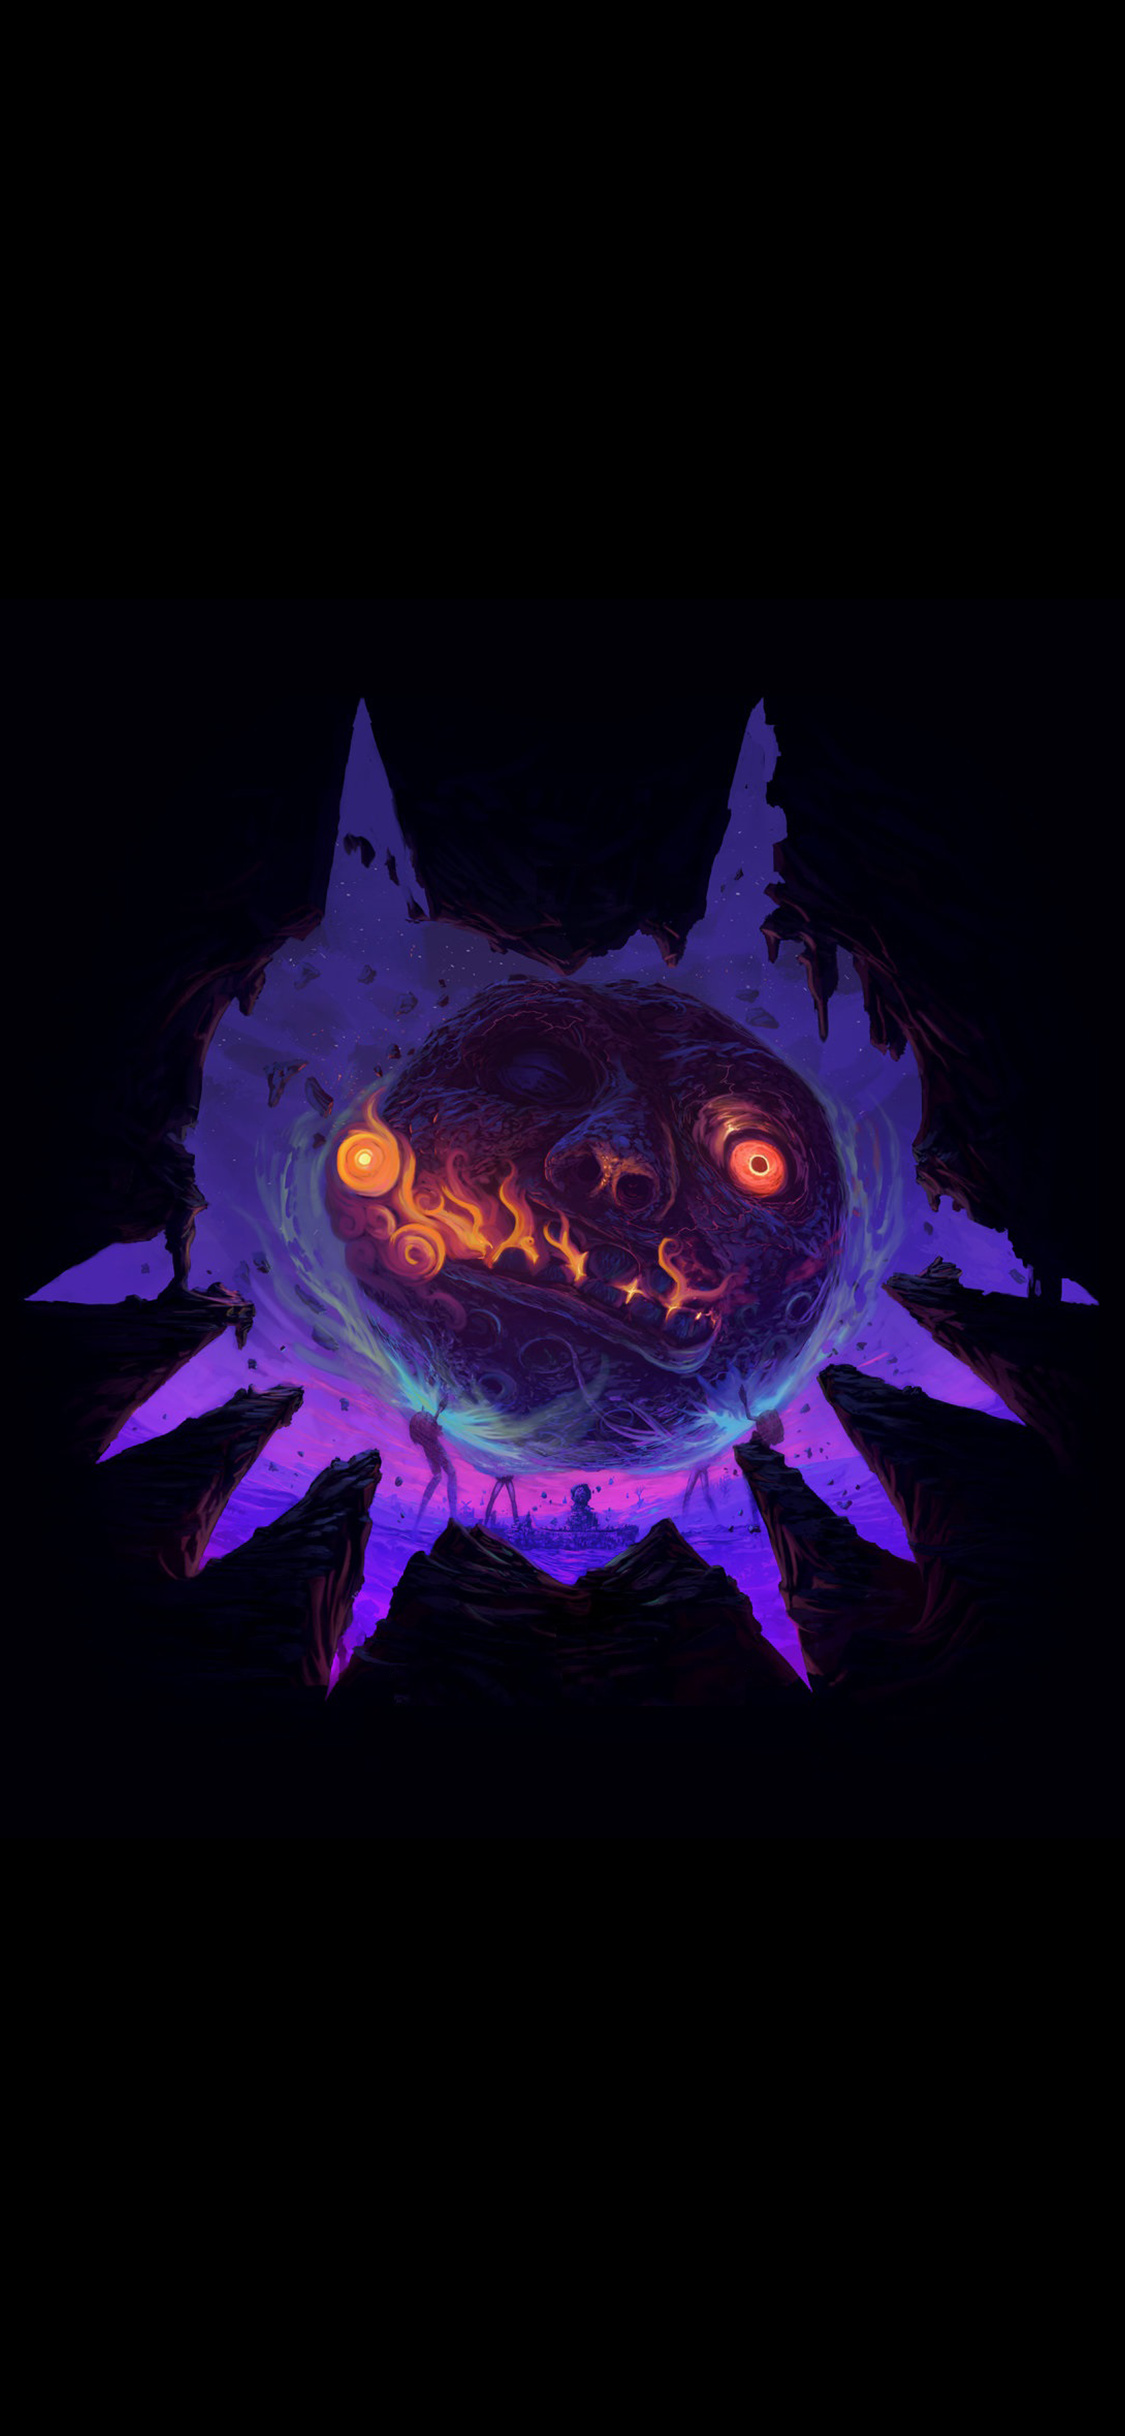 Majora's Mask wallpapers, Top free backgrounds, 1130x2440 HD Handy